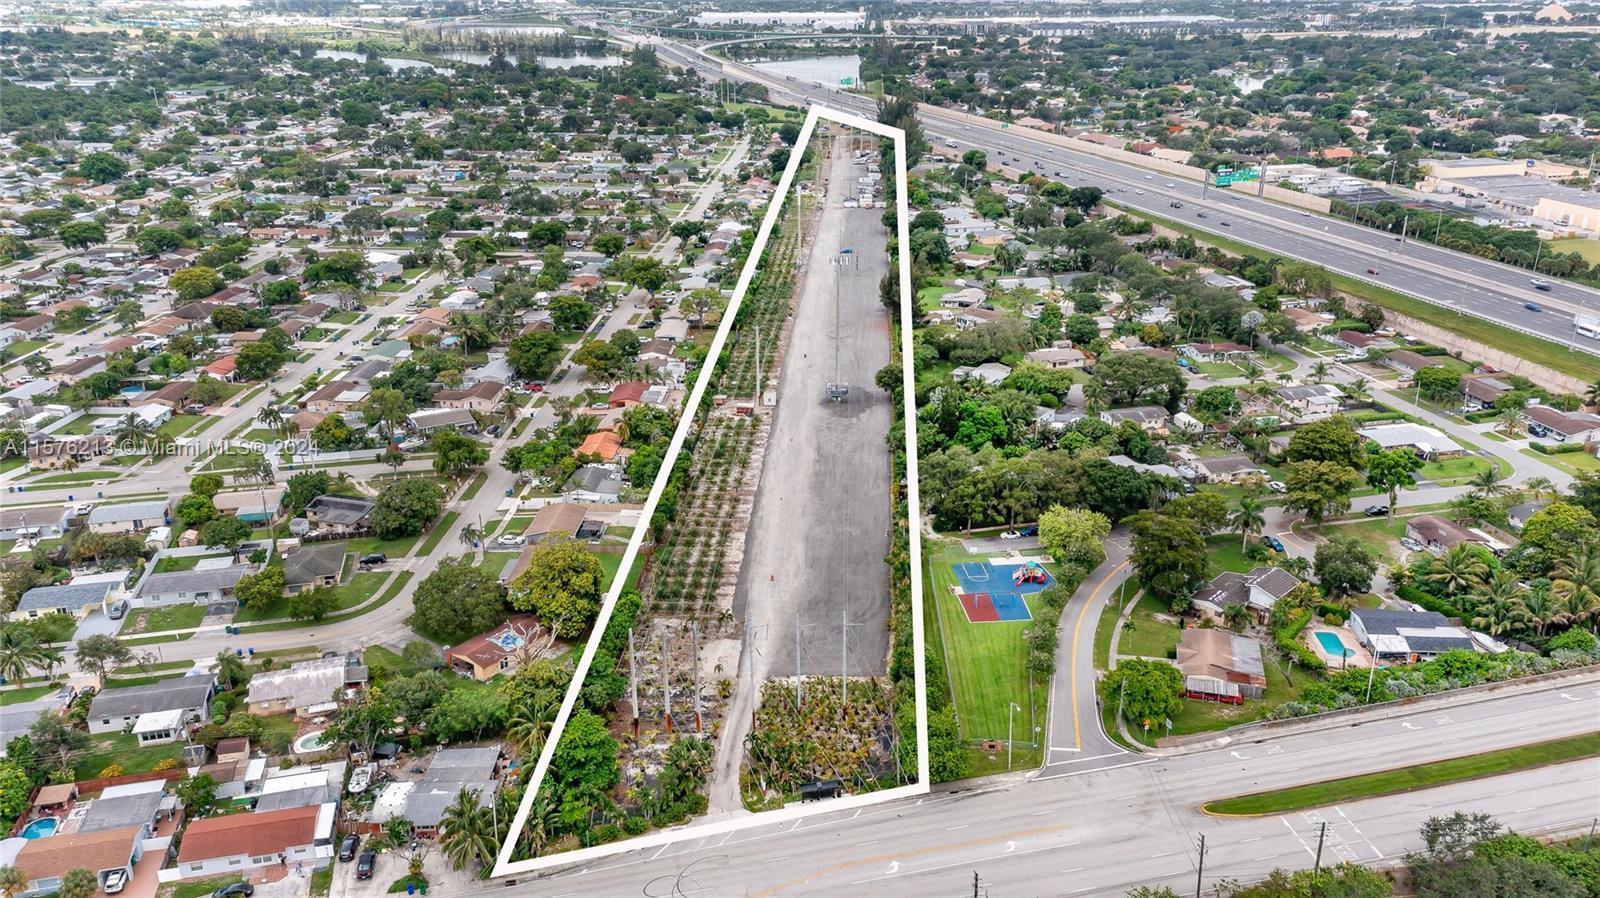 Introducing a unique investment opportunity located in Plantation, FL consisting of 8.8 acres of pri